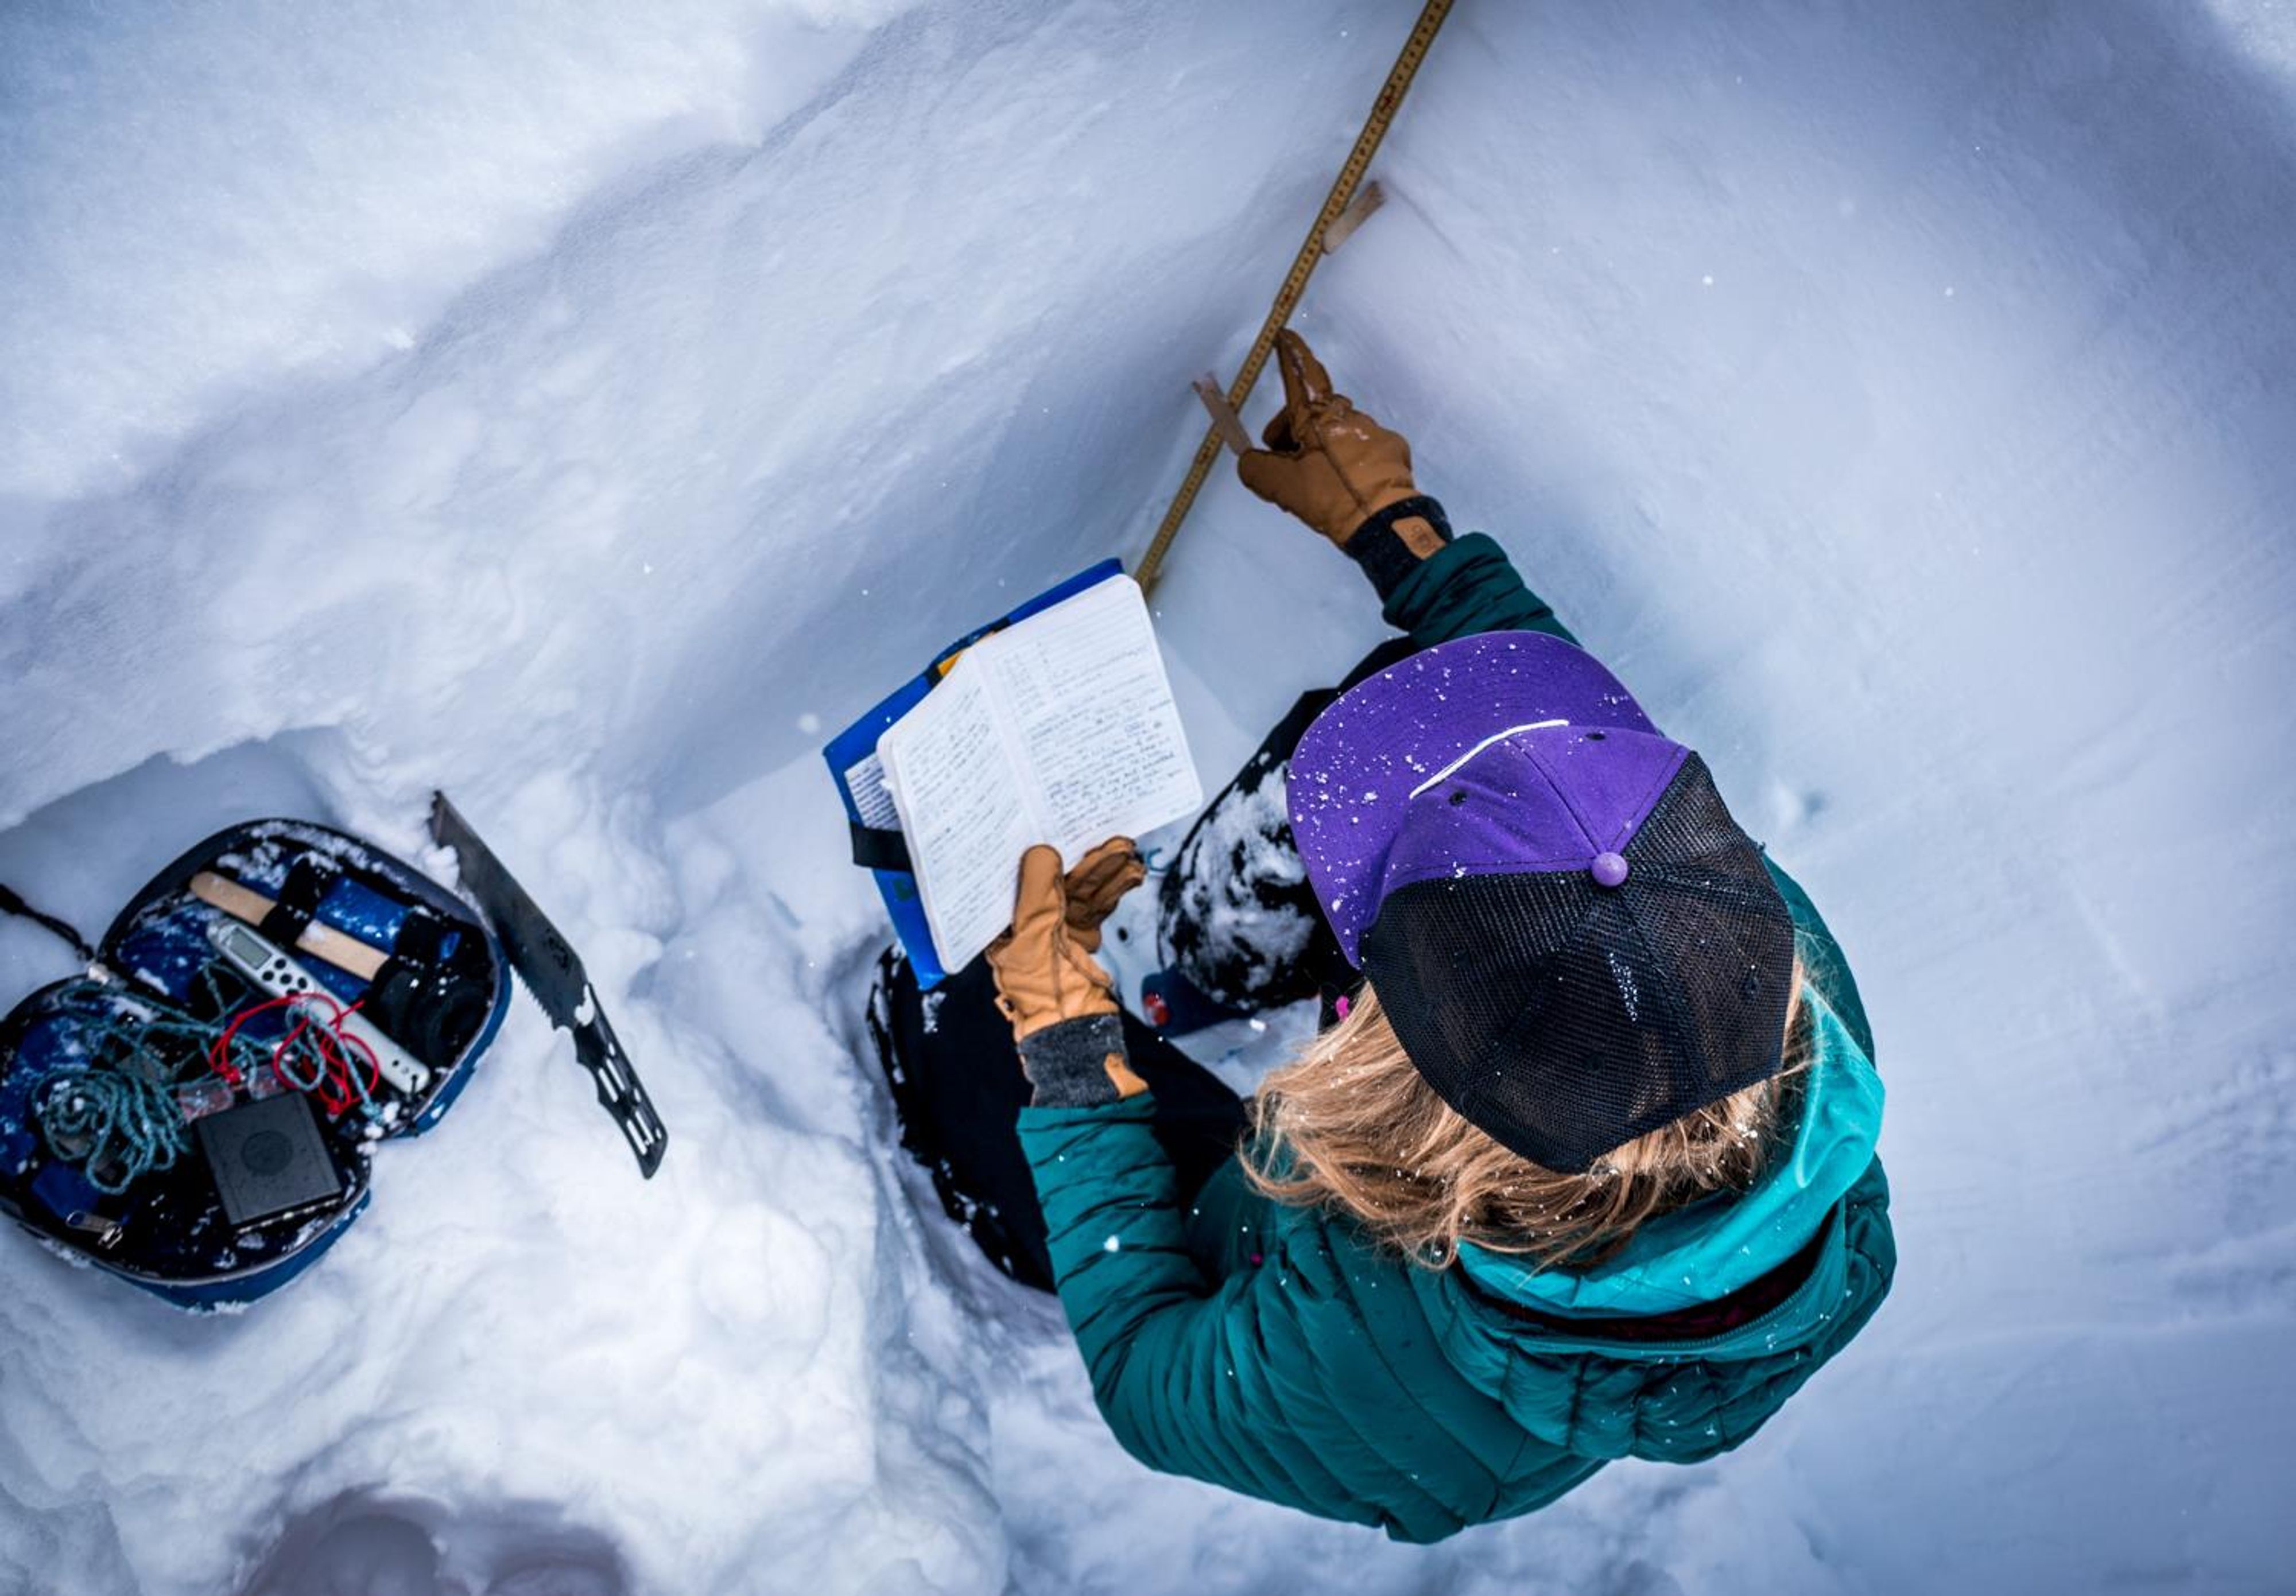 An avalanche professional digs a snow pit.